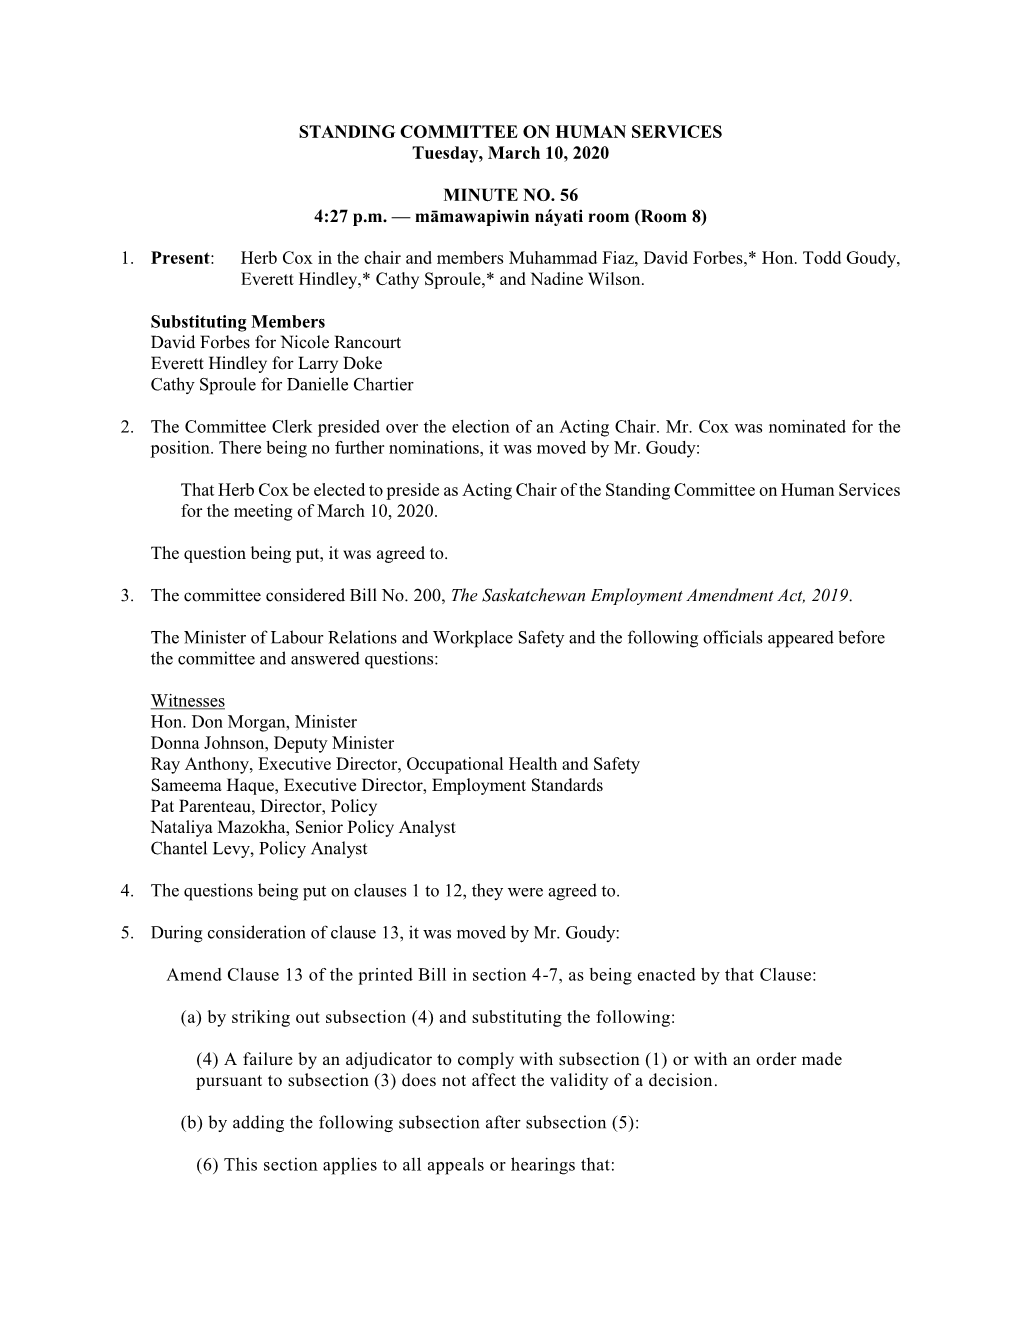 STANDING COMMITTEE on HUMAN SERVICES Tuesday, March 10, 2020